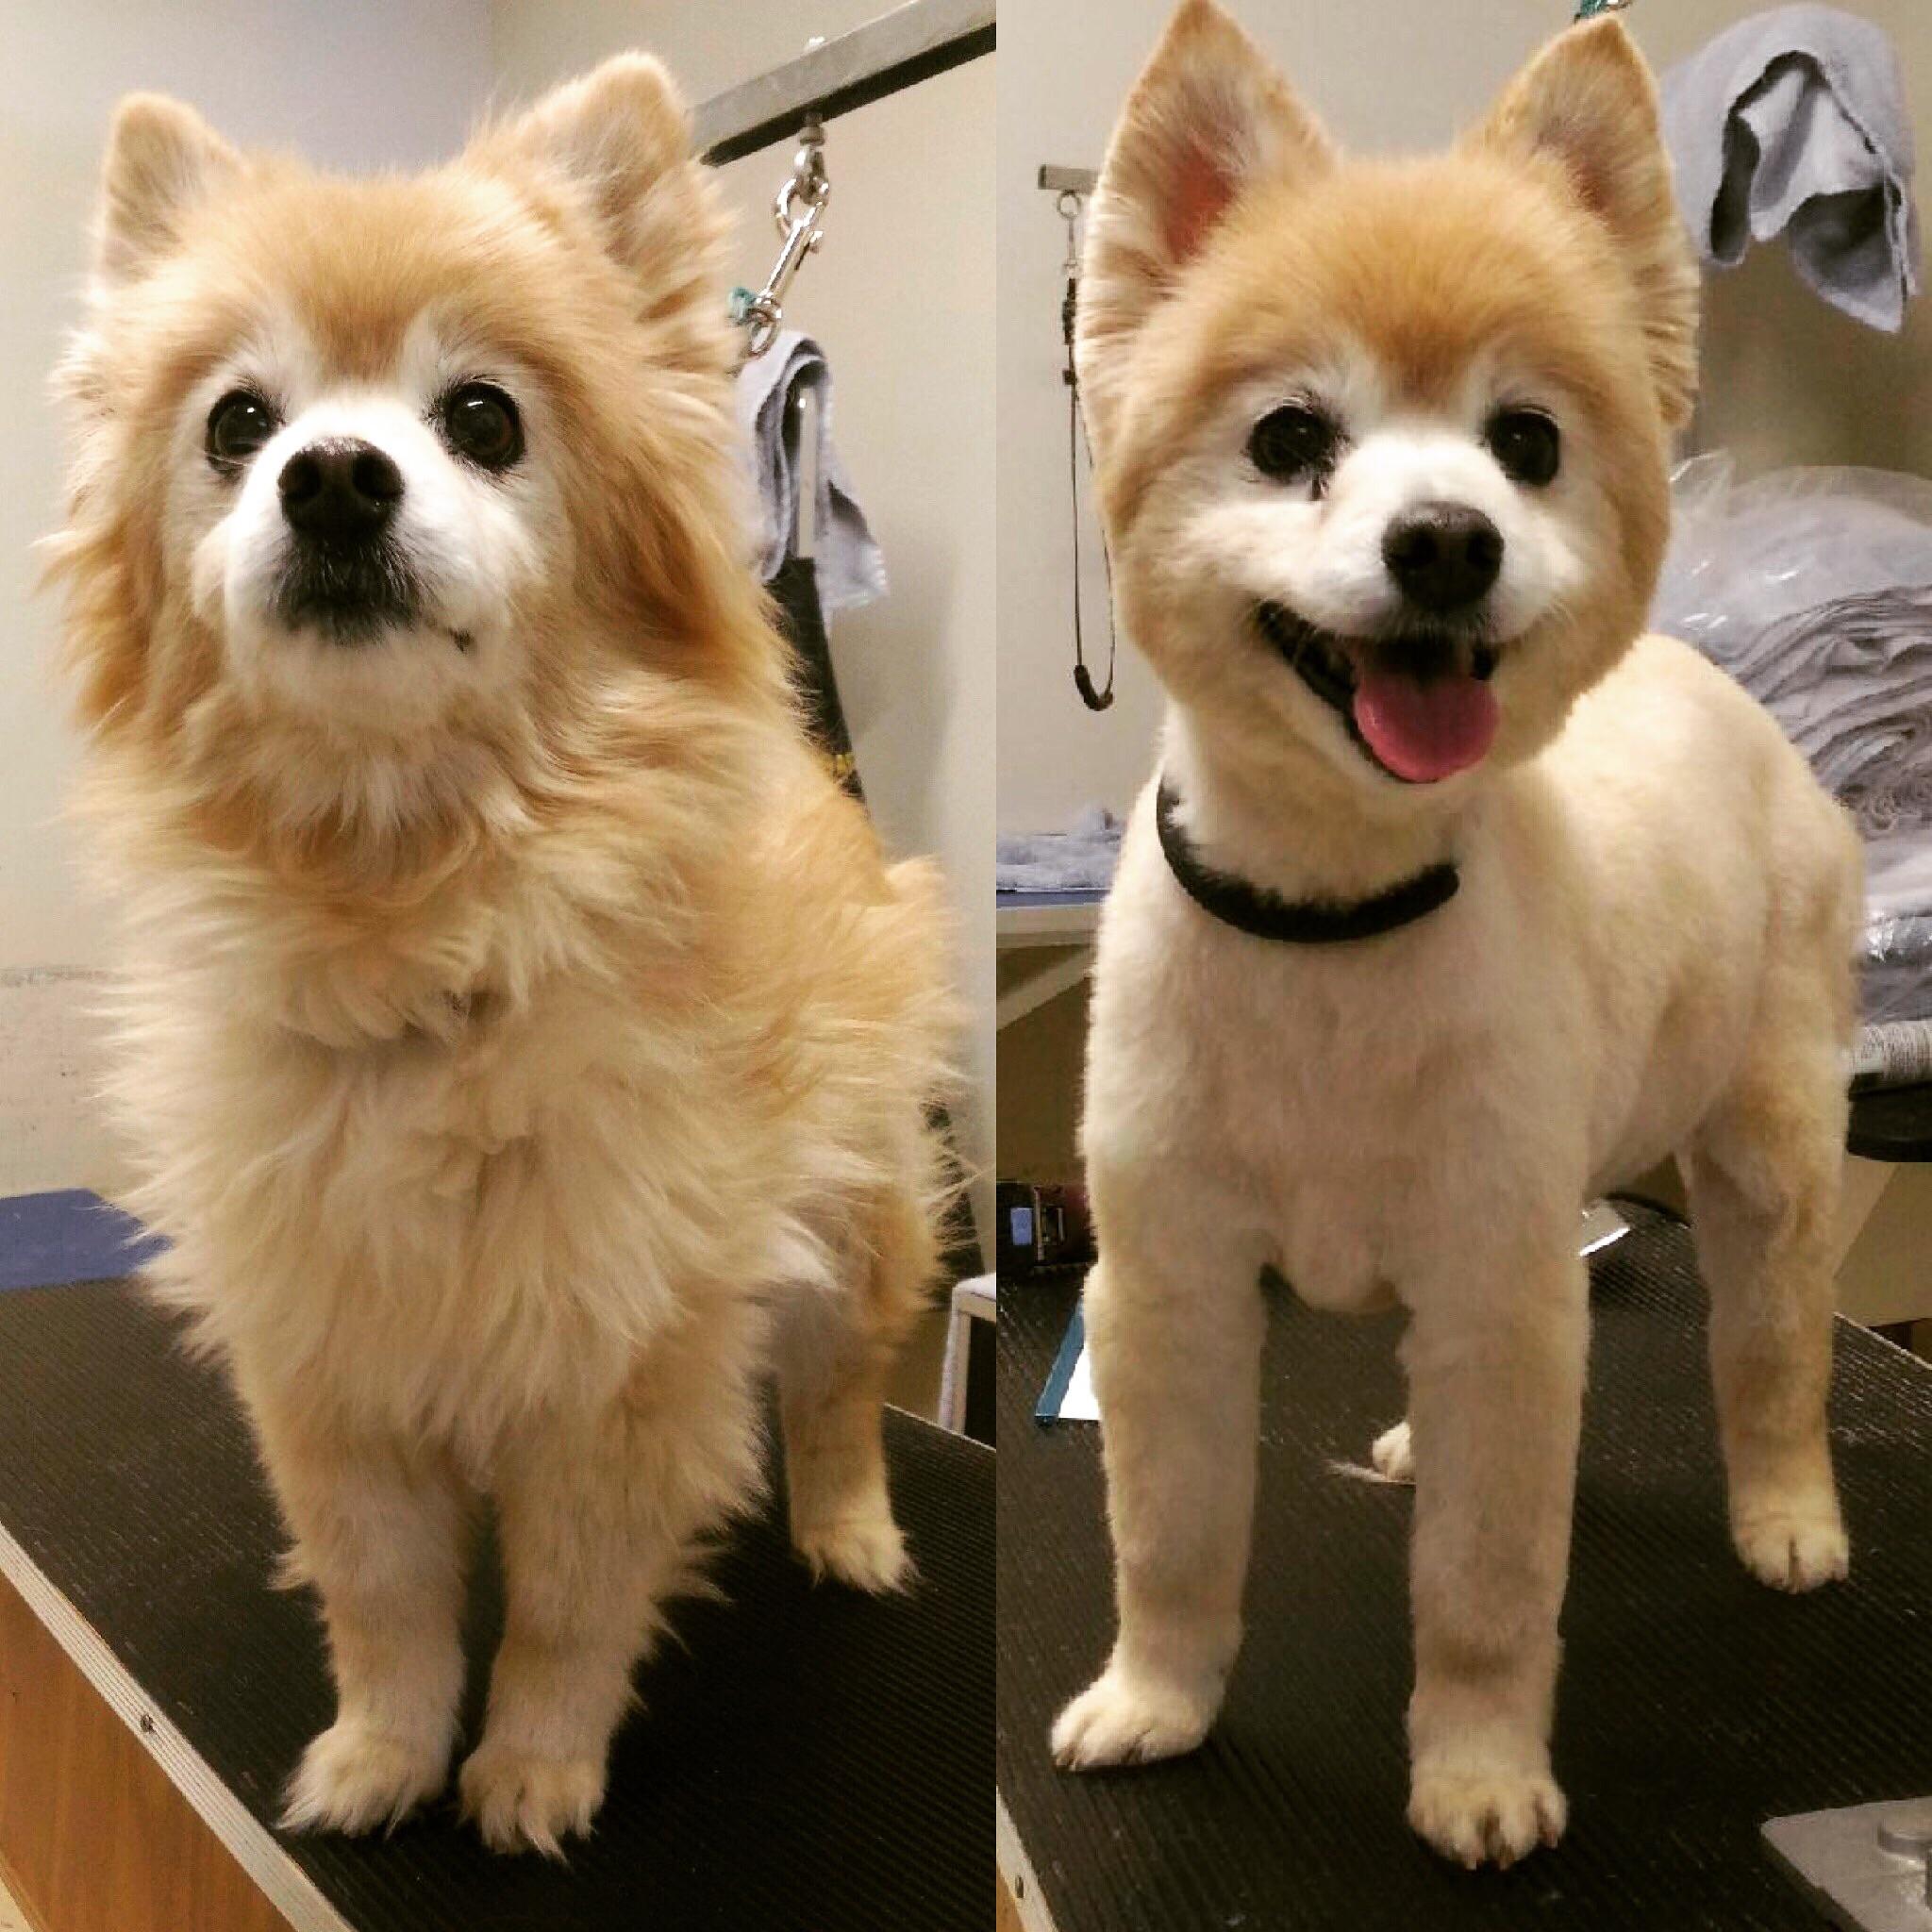 A two-photo collage. The first shows a small, fluffy, golden dog. The second photo shows that same dog after a haircut, revealing just how small she is.